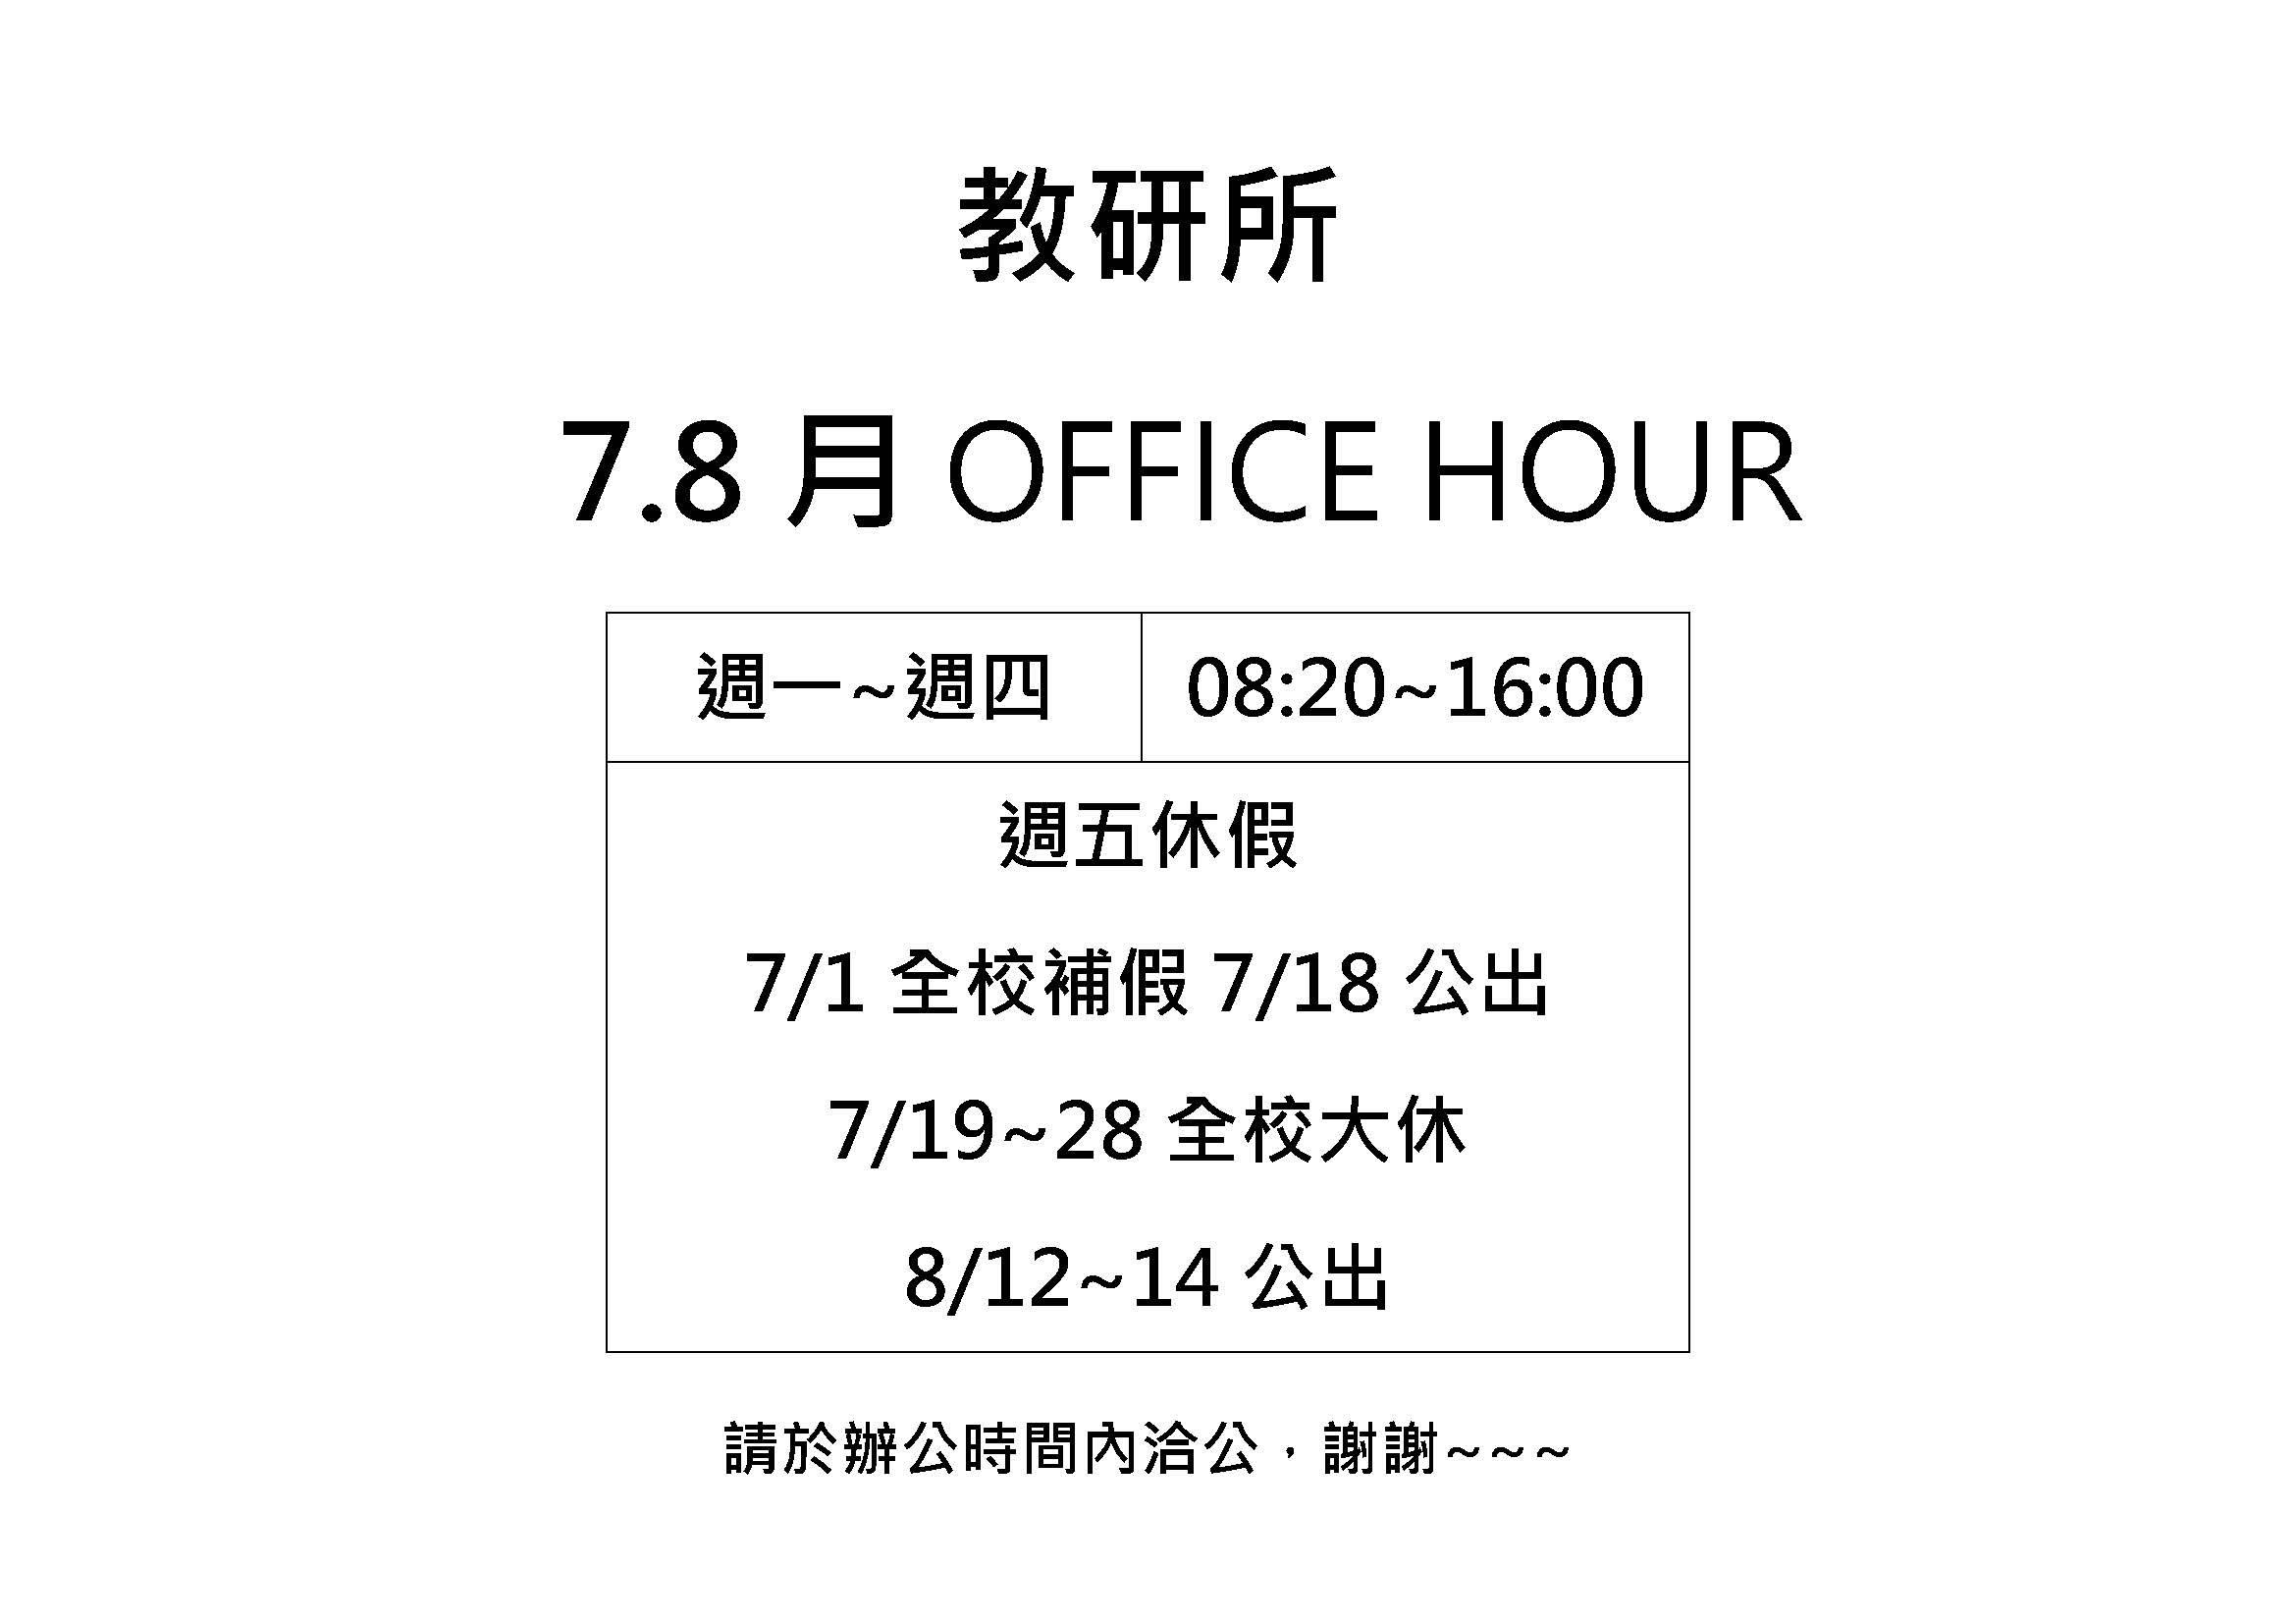 Featured image for “【所辦7.8月OFFICE HOUR】”